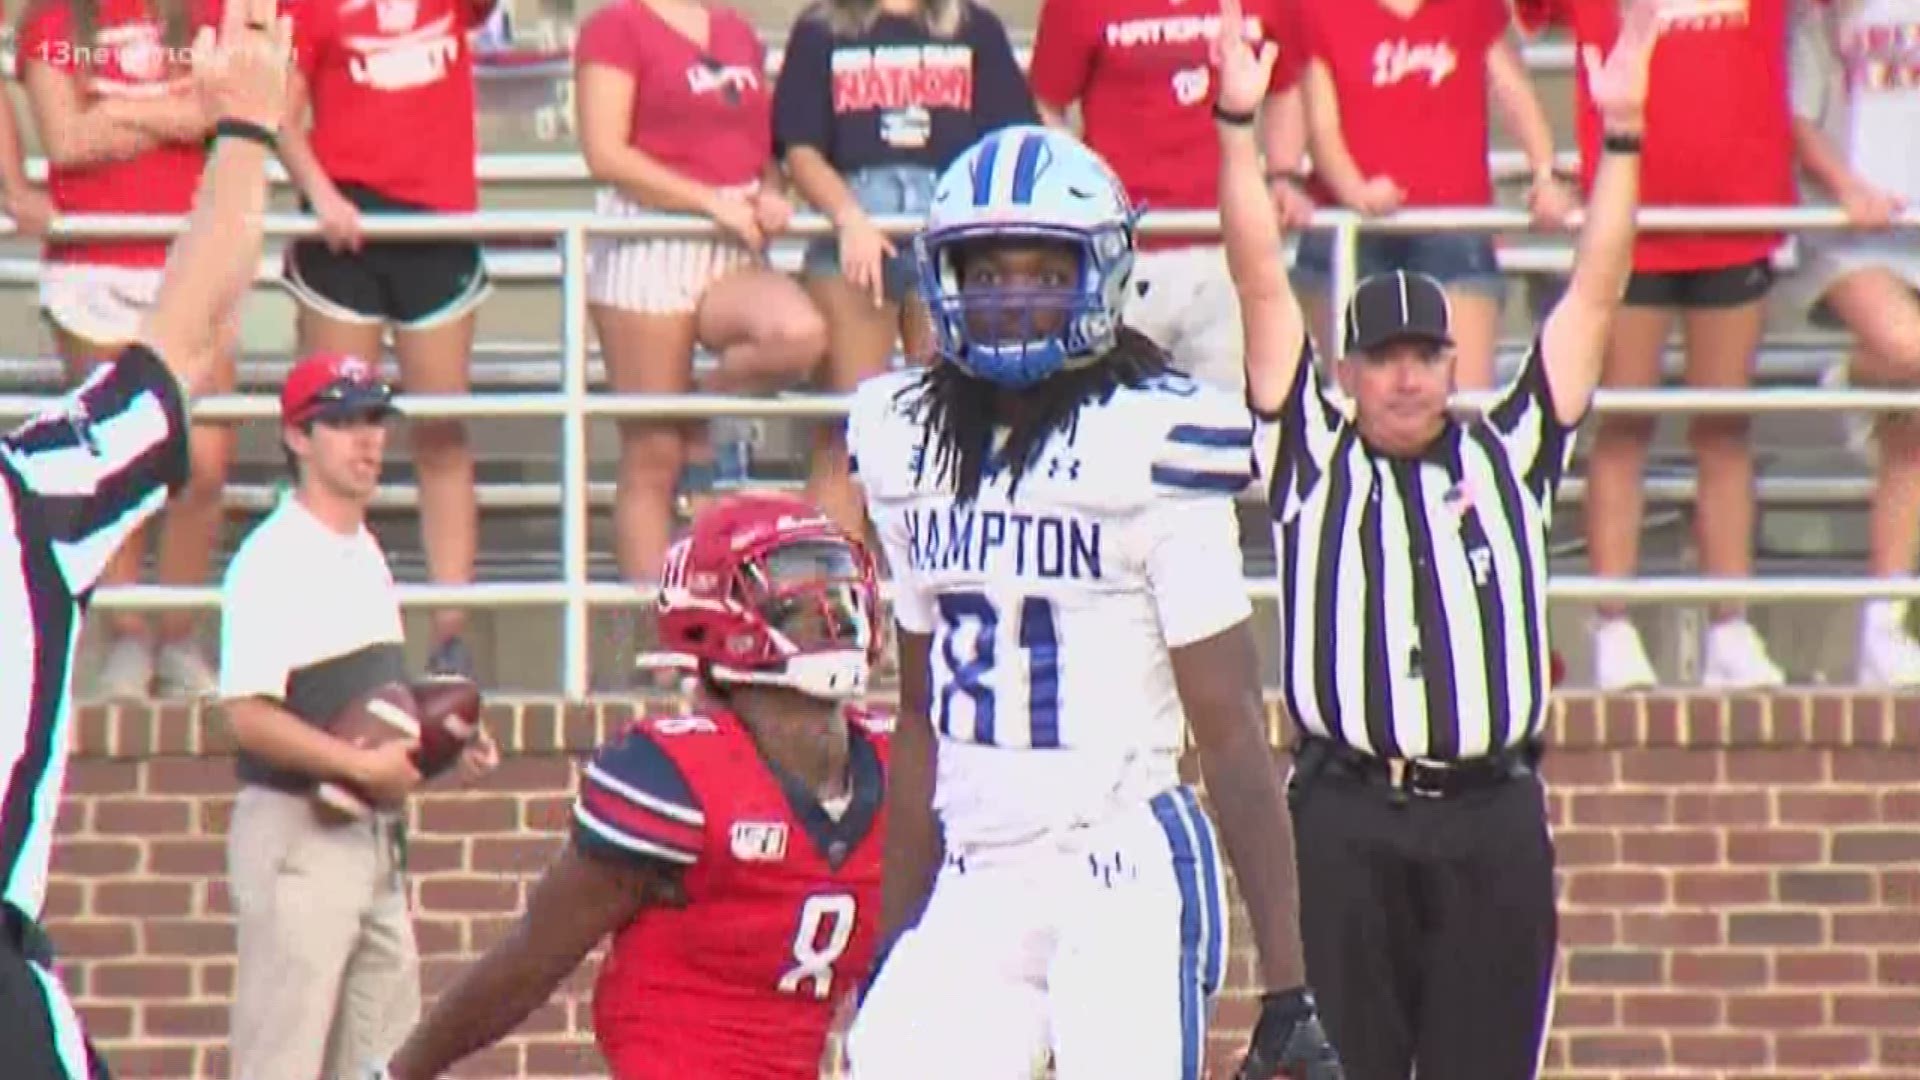 Bonds has NFL talent and has 10 touchdowns in Hampton's first 5 games.